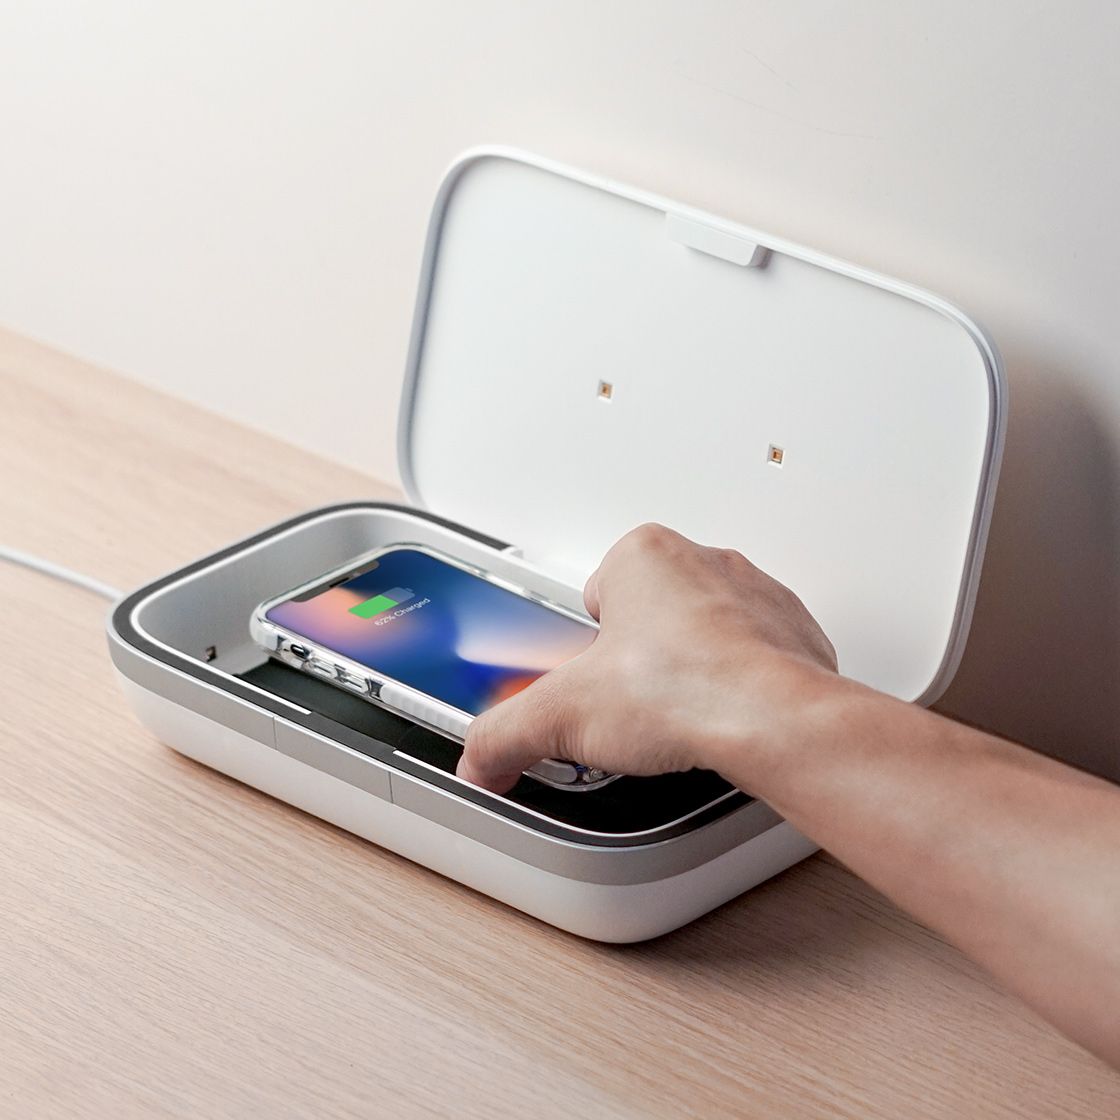 Forget Hand Sanitizer, Now there is a Phone Sanitizer (and it’s a pretty great idea!)